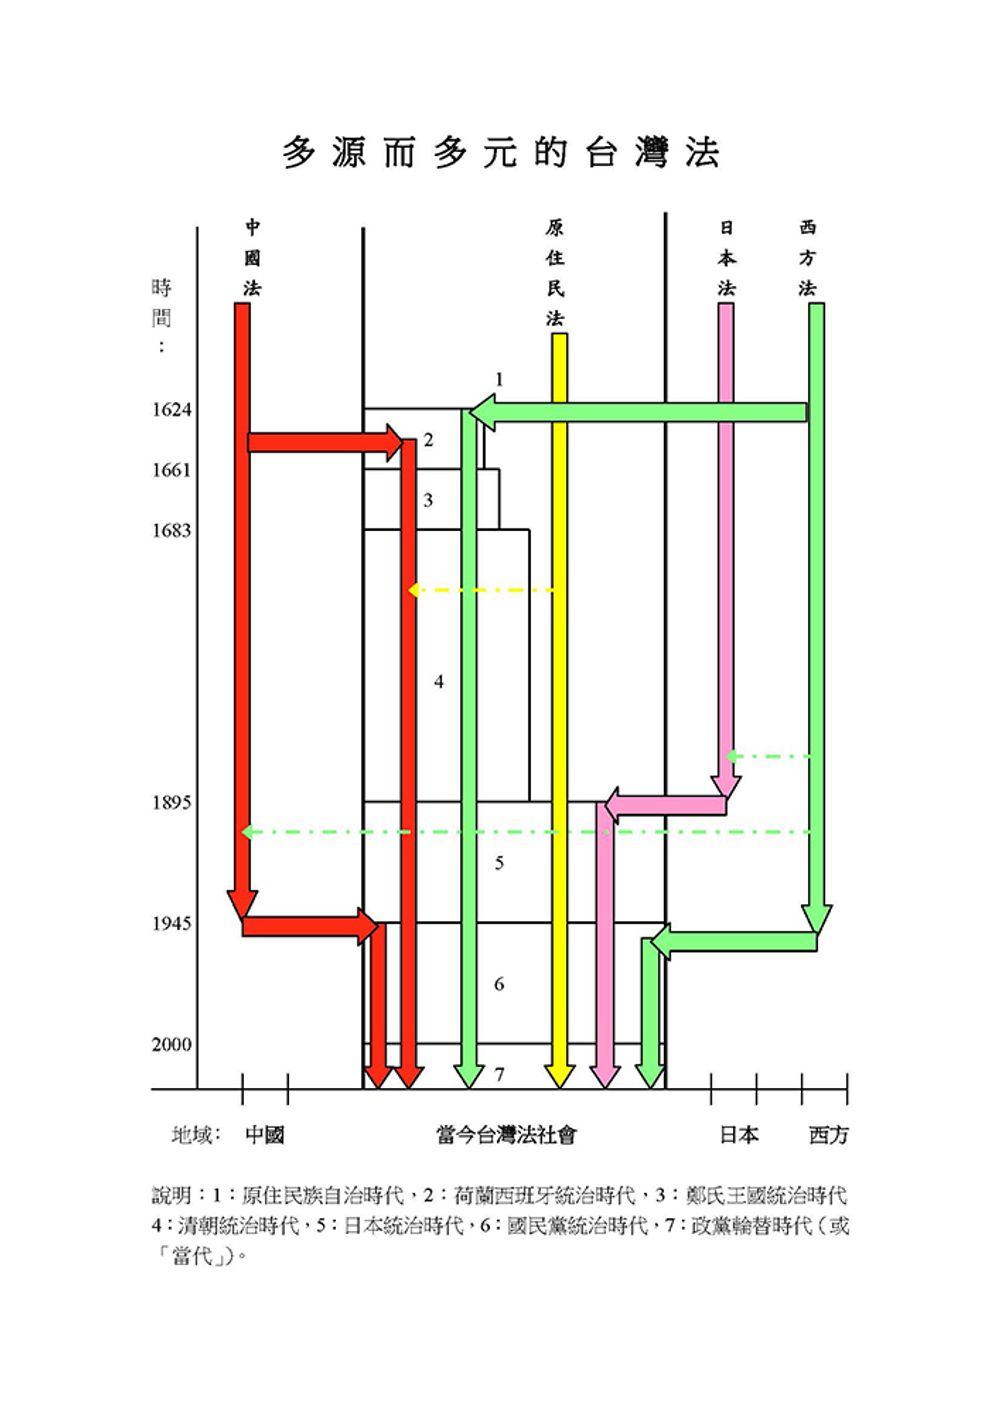 Chart indicating the multiple origins in Taiwan’s diverse legal cultures